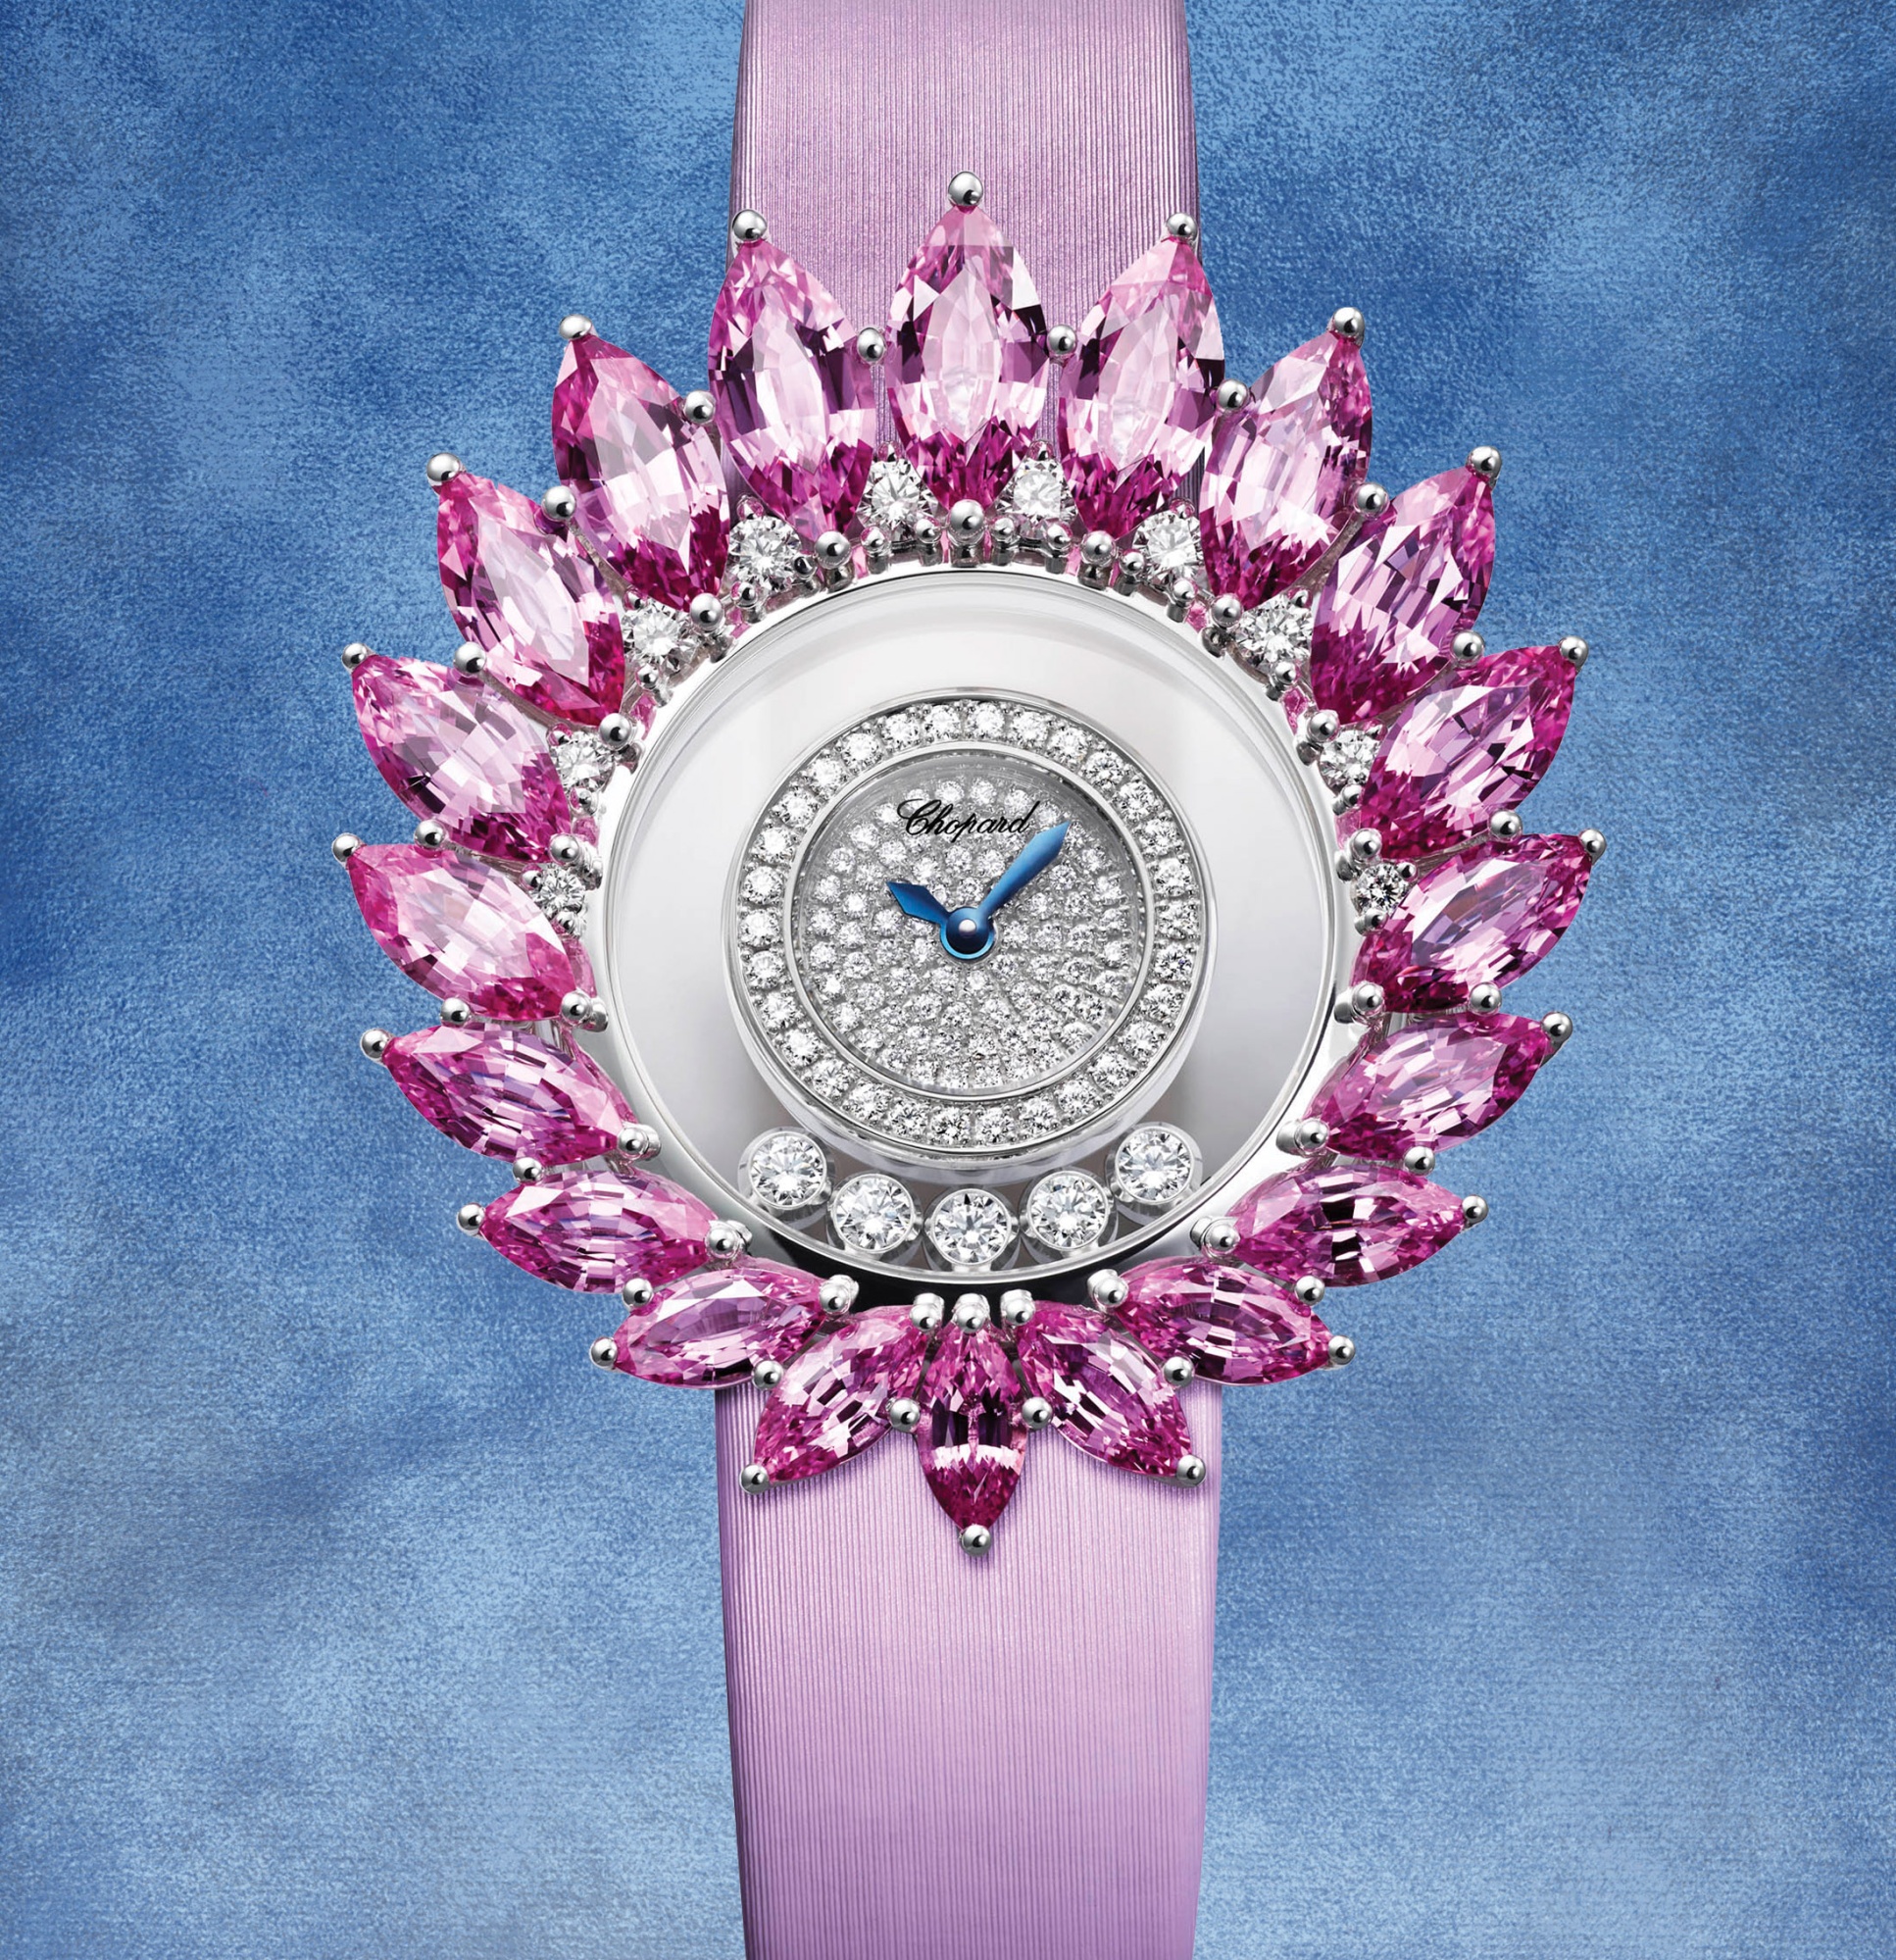 These blinged-out diamond watches are ready for the red carpet